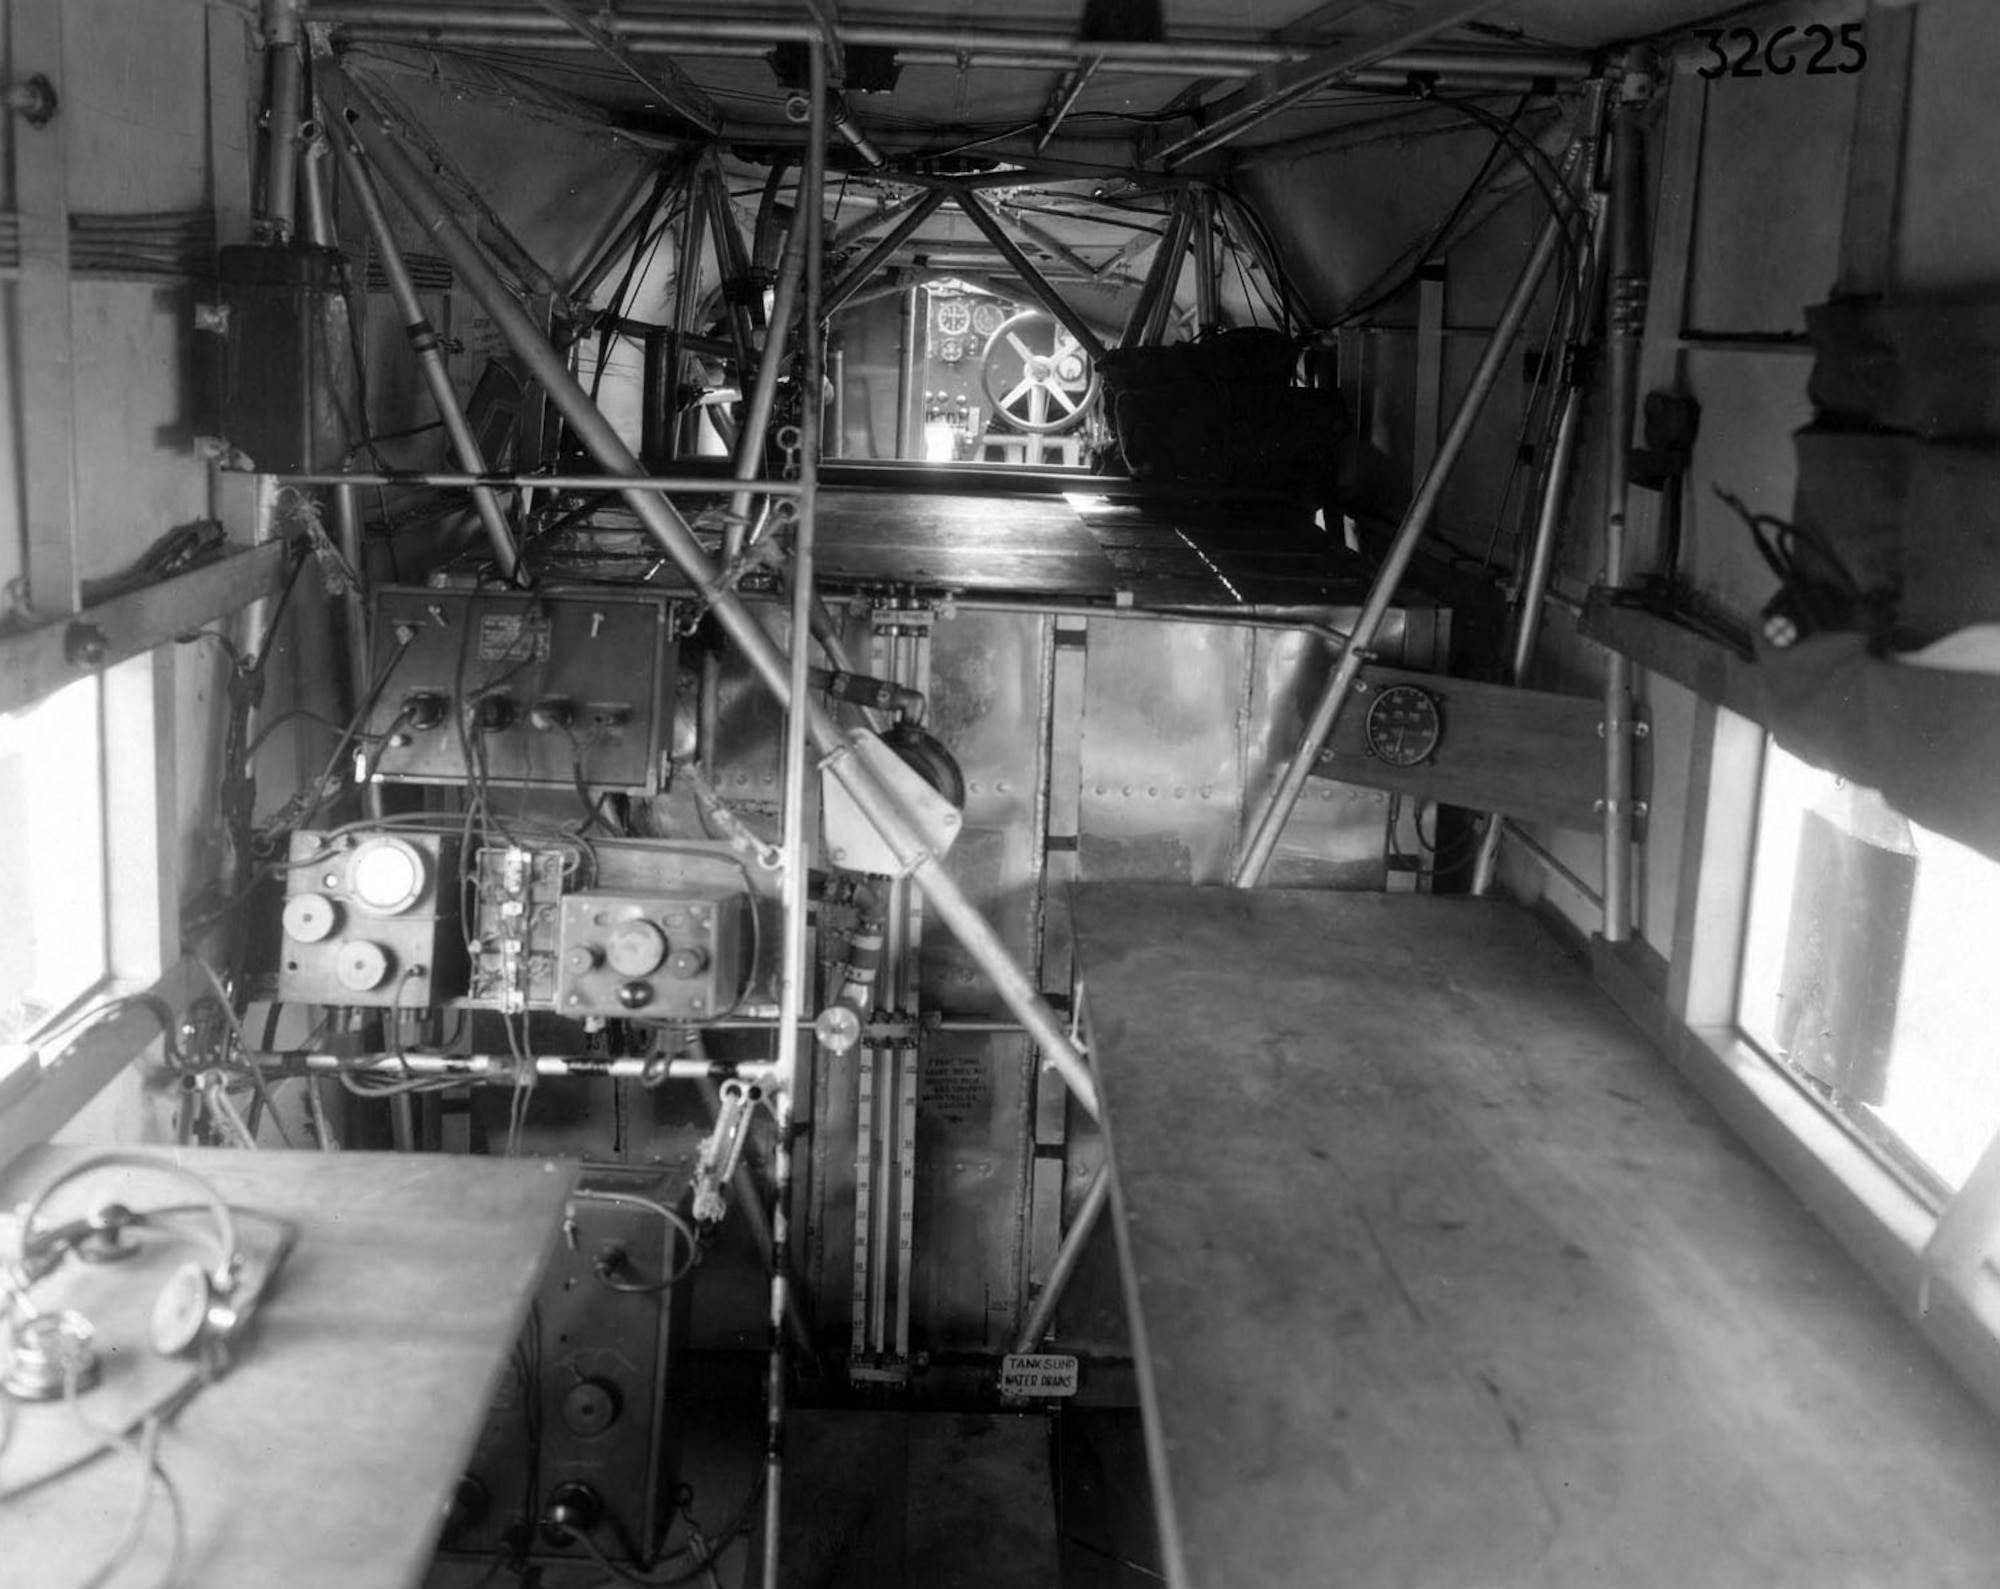 Atlantic-Fokker C-2 "Bird of Paradise" interior view, looking forward from navigator compartment. (U.S. Air Force photo)